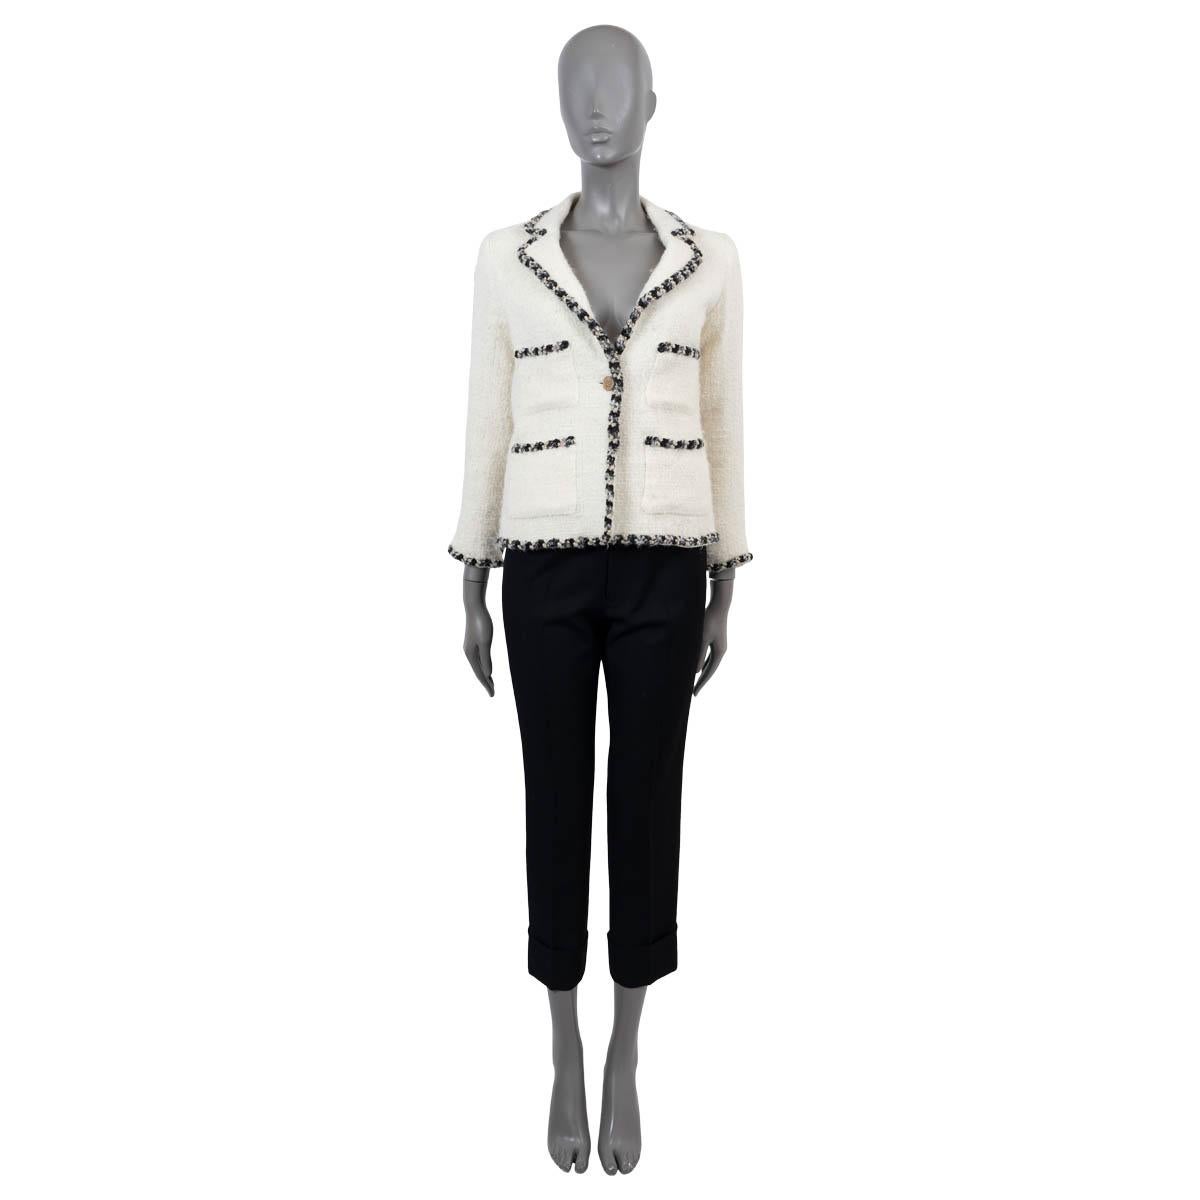 100% authentic Chanel tweed jacket in cream wool (with 3% nylon). Features a contrast braided trim in black, beige and cream, four patch pockets and a notched lapel. Closes with a antique gold button on the front and is lined in silk (with 5%